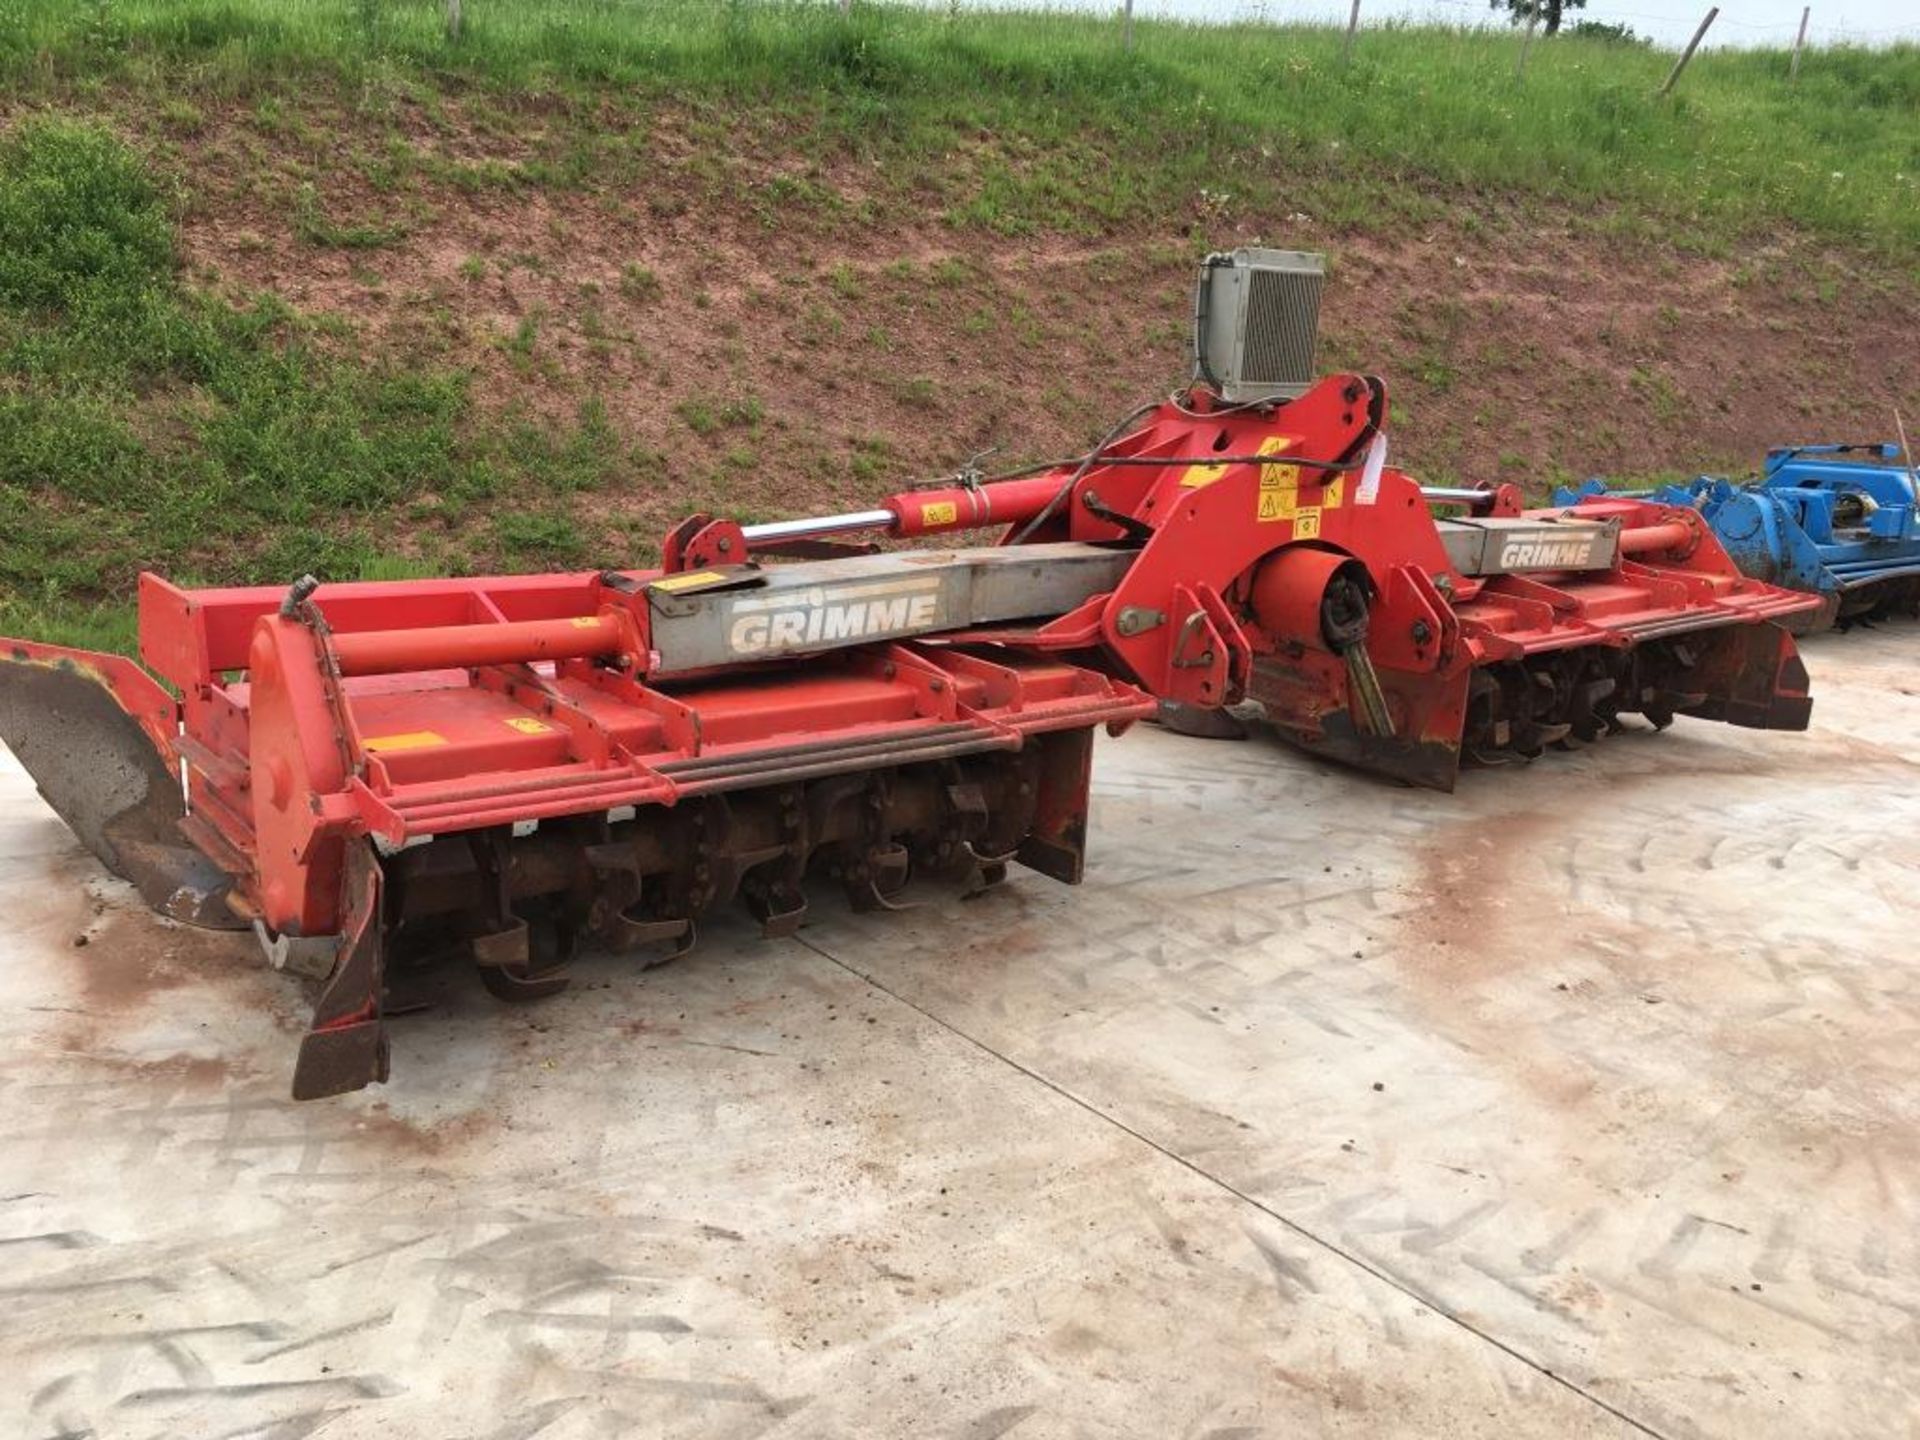 Grimme RT6000, with triple bed CT6000 tillers, serial number: 60000043 - Bild 2 aus 26